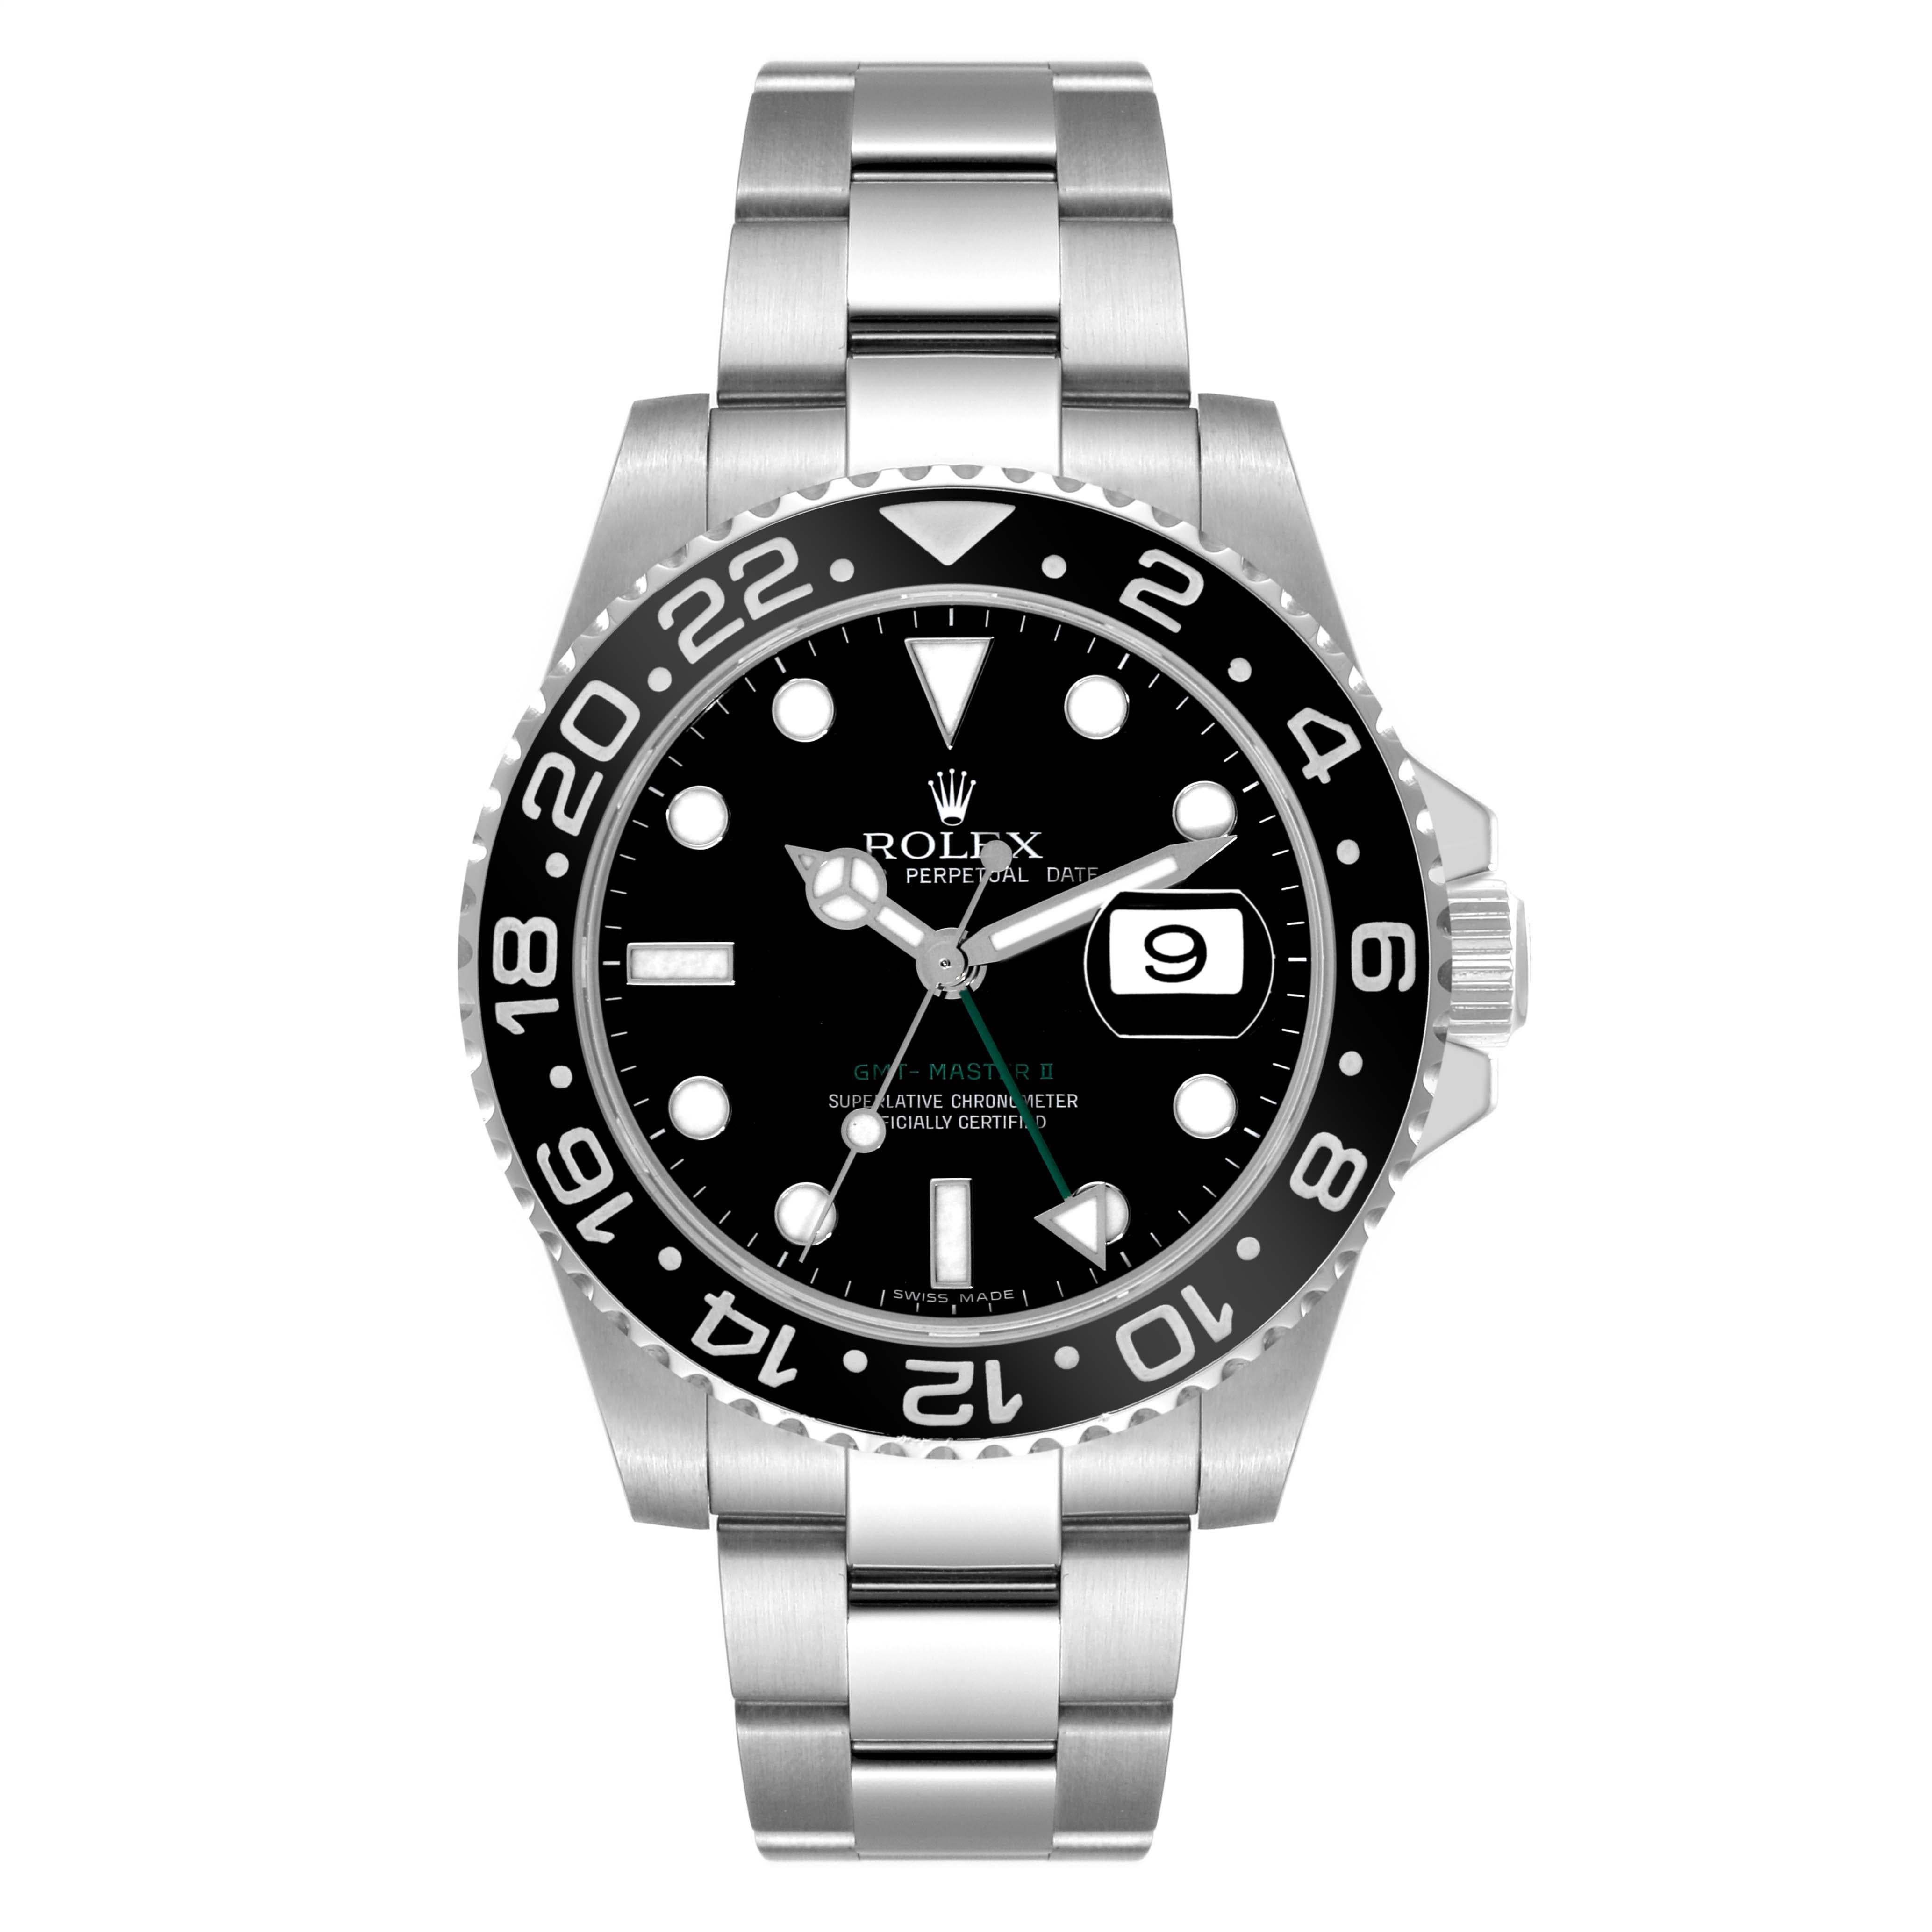 Rolex GMT Master II Black Dial Green Hand Steel Mens Watch 116710 Box Papers. Officially certified chronometer automatic self-winding movement. Stainless steel case 40.0 mm in diameter. Rolex logo on the crown. Stainless steel bidirectional rotating